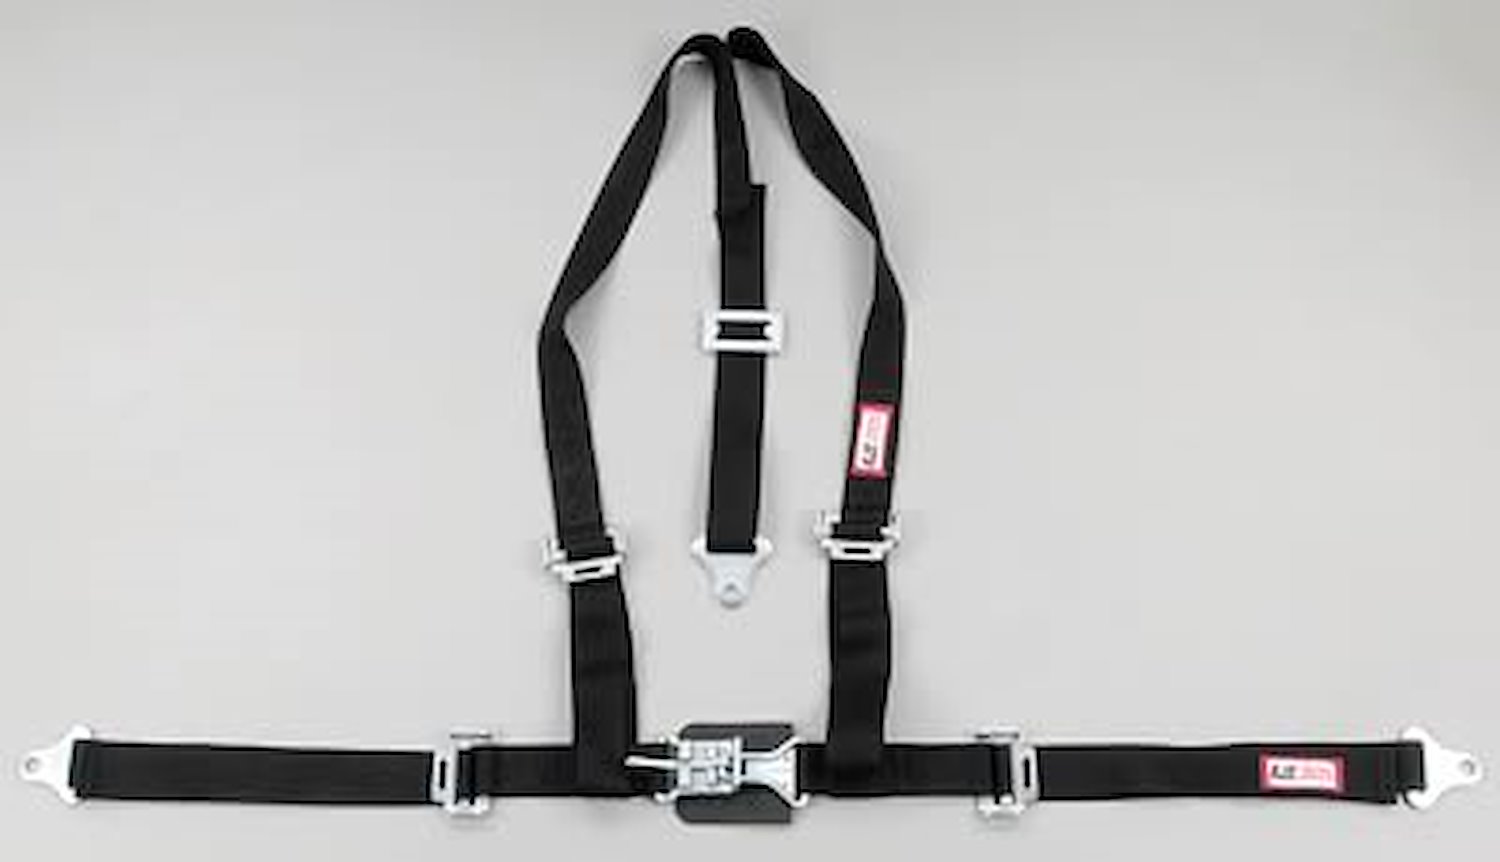 NON-SFI L&L HARNESS 2 PULL DOWN Lap Belt SEWN IN 2 S.H. Y FLOOR Mount w/STERNUM STRAP ALL WRAP ENDS YELLOW